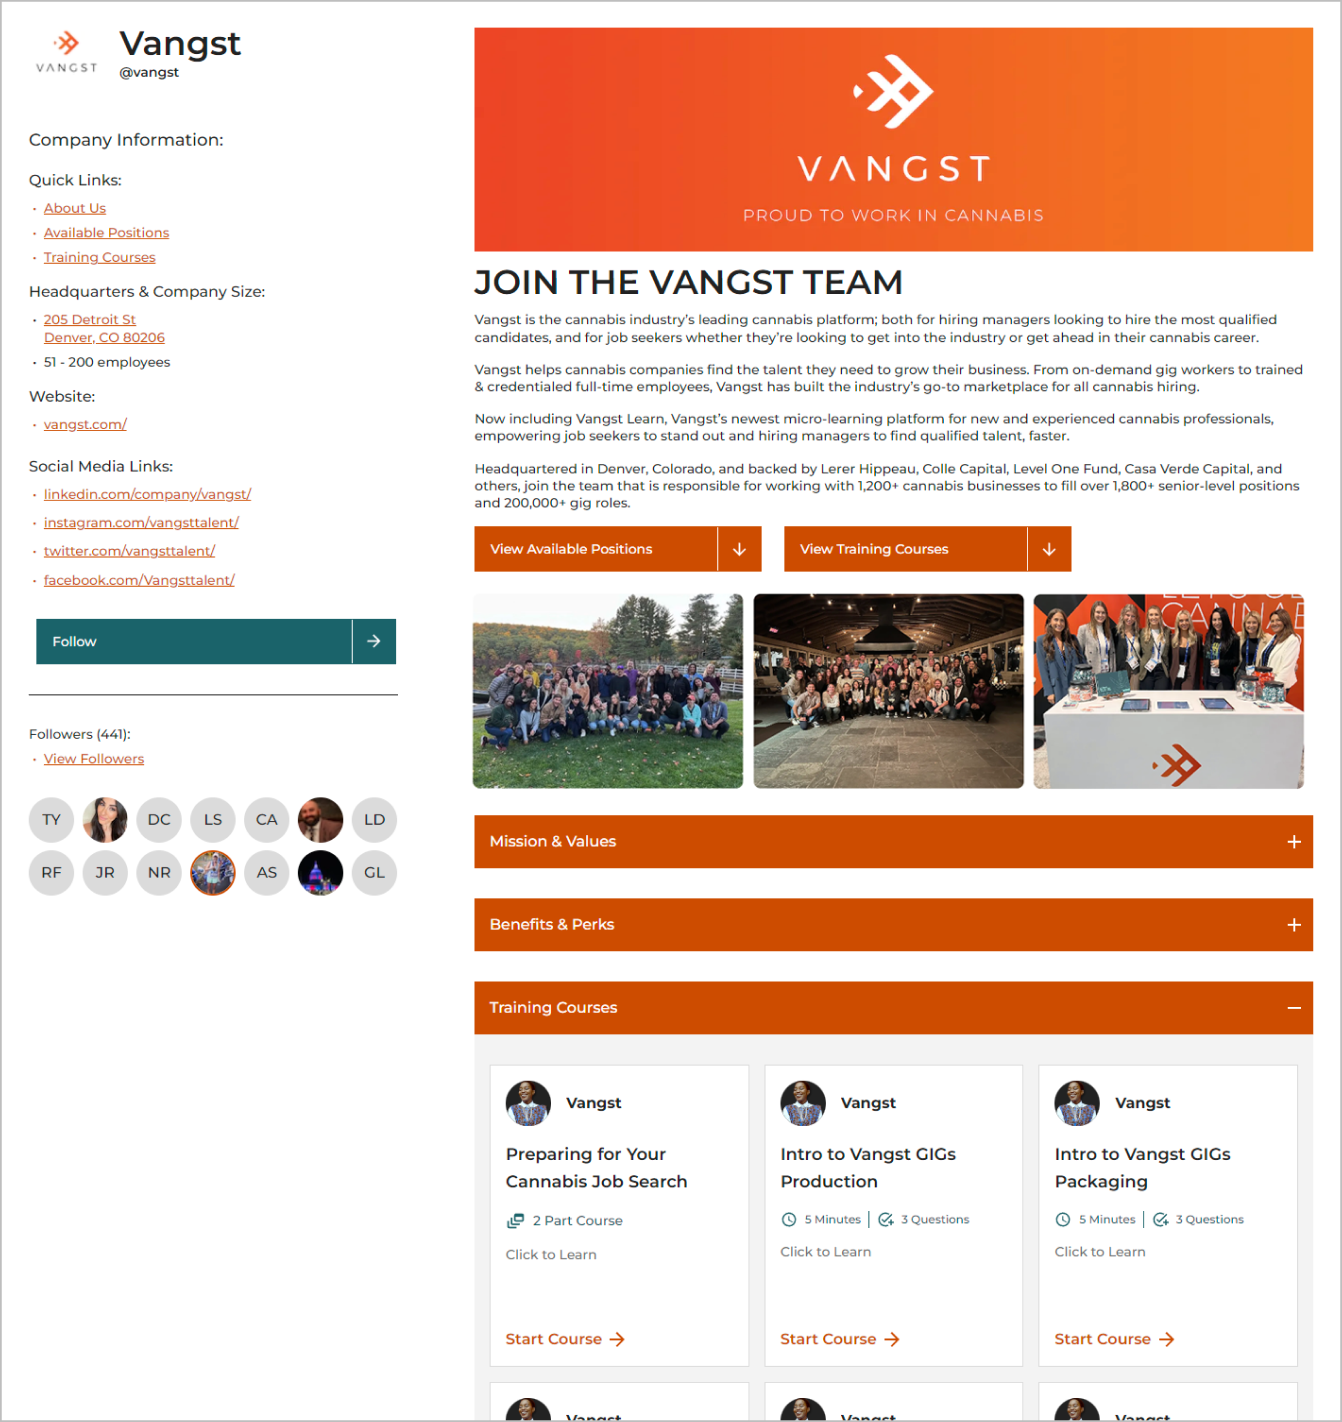 A Vangst company profile showing available training courses